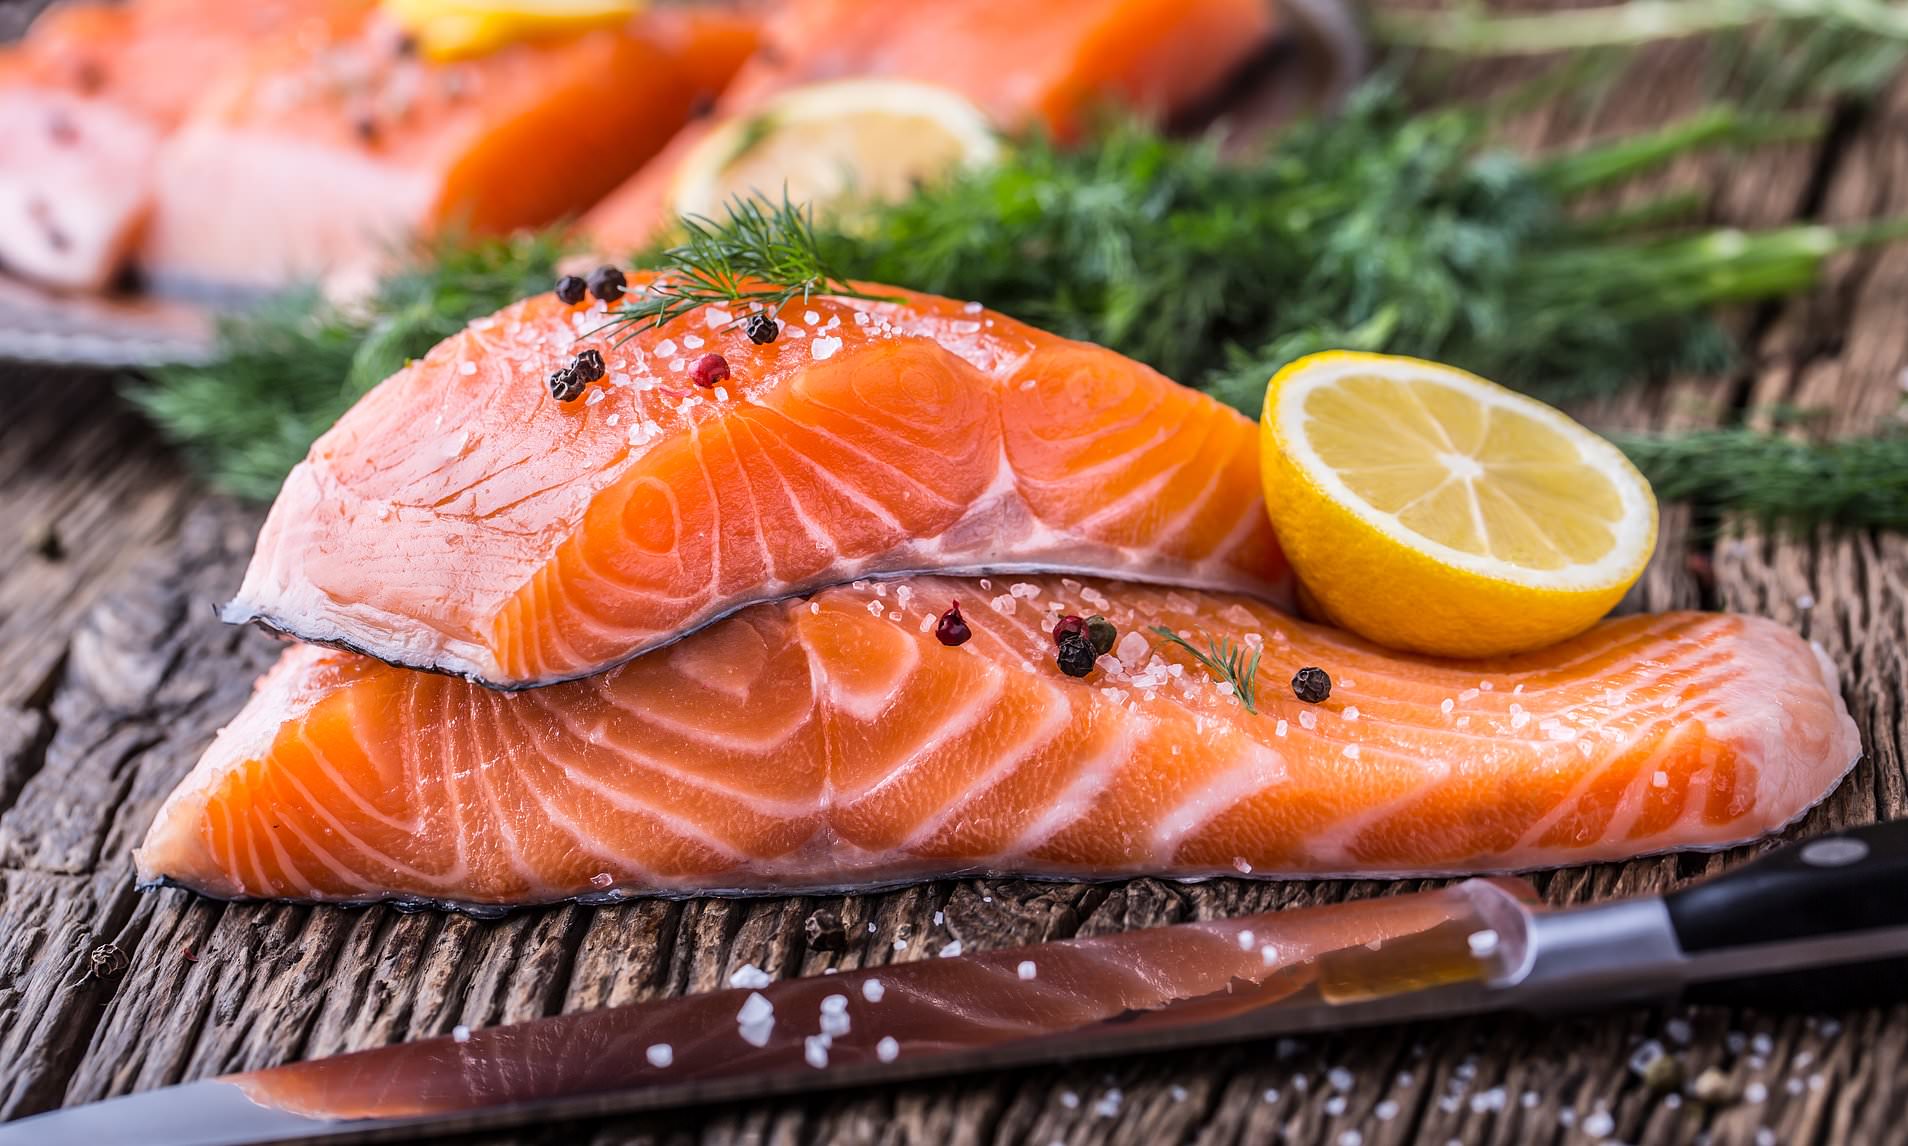 Fish three times a week slashes risk of bowel cancer, new study suggests